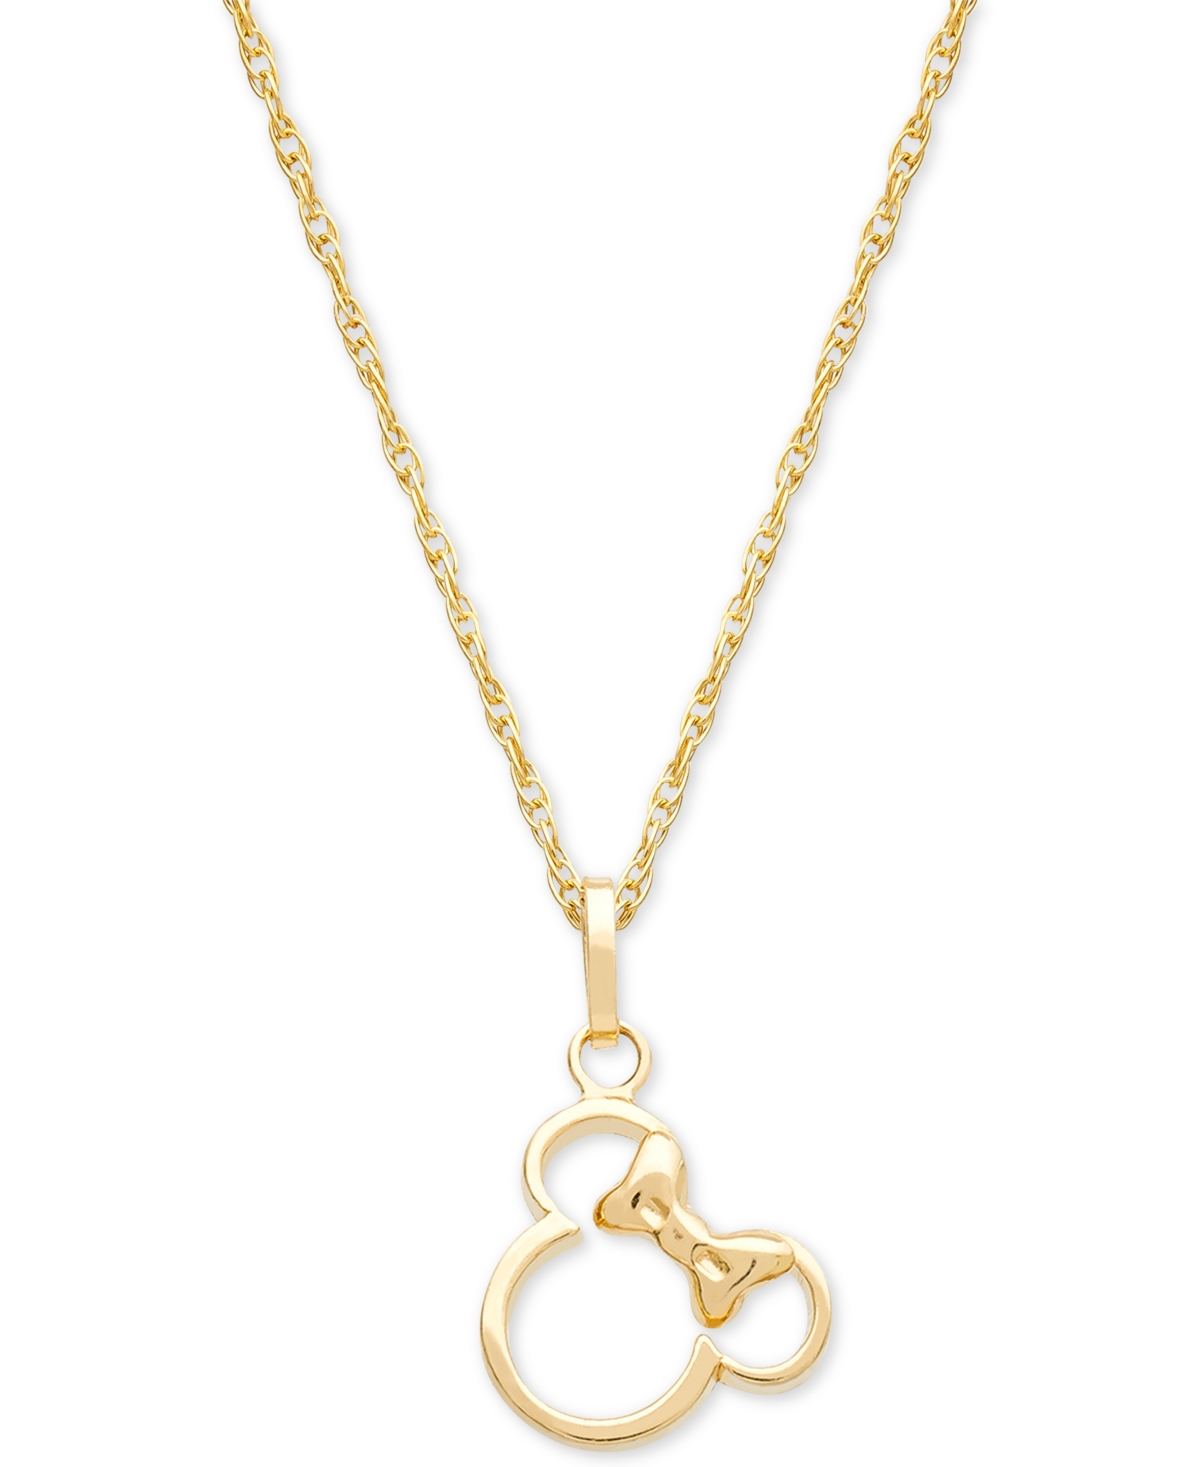 DISNEY CHILDREN'S MINNIE MOUSE SILHOUETTE 15" PENDANT NECKLACE IN 14K GOLD